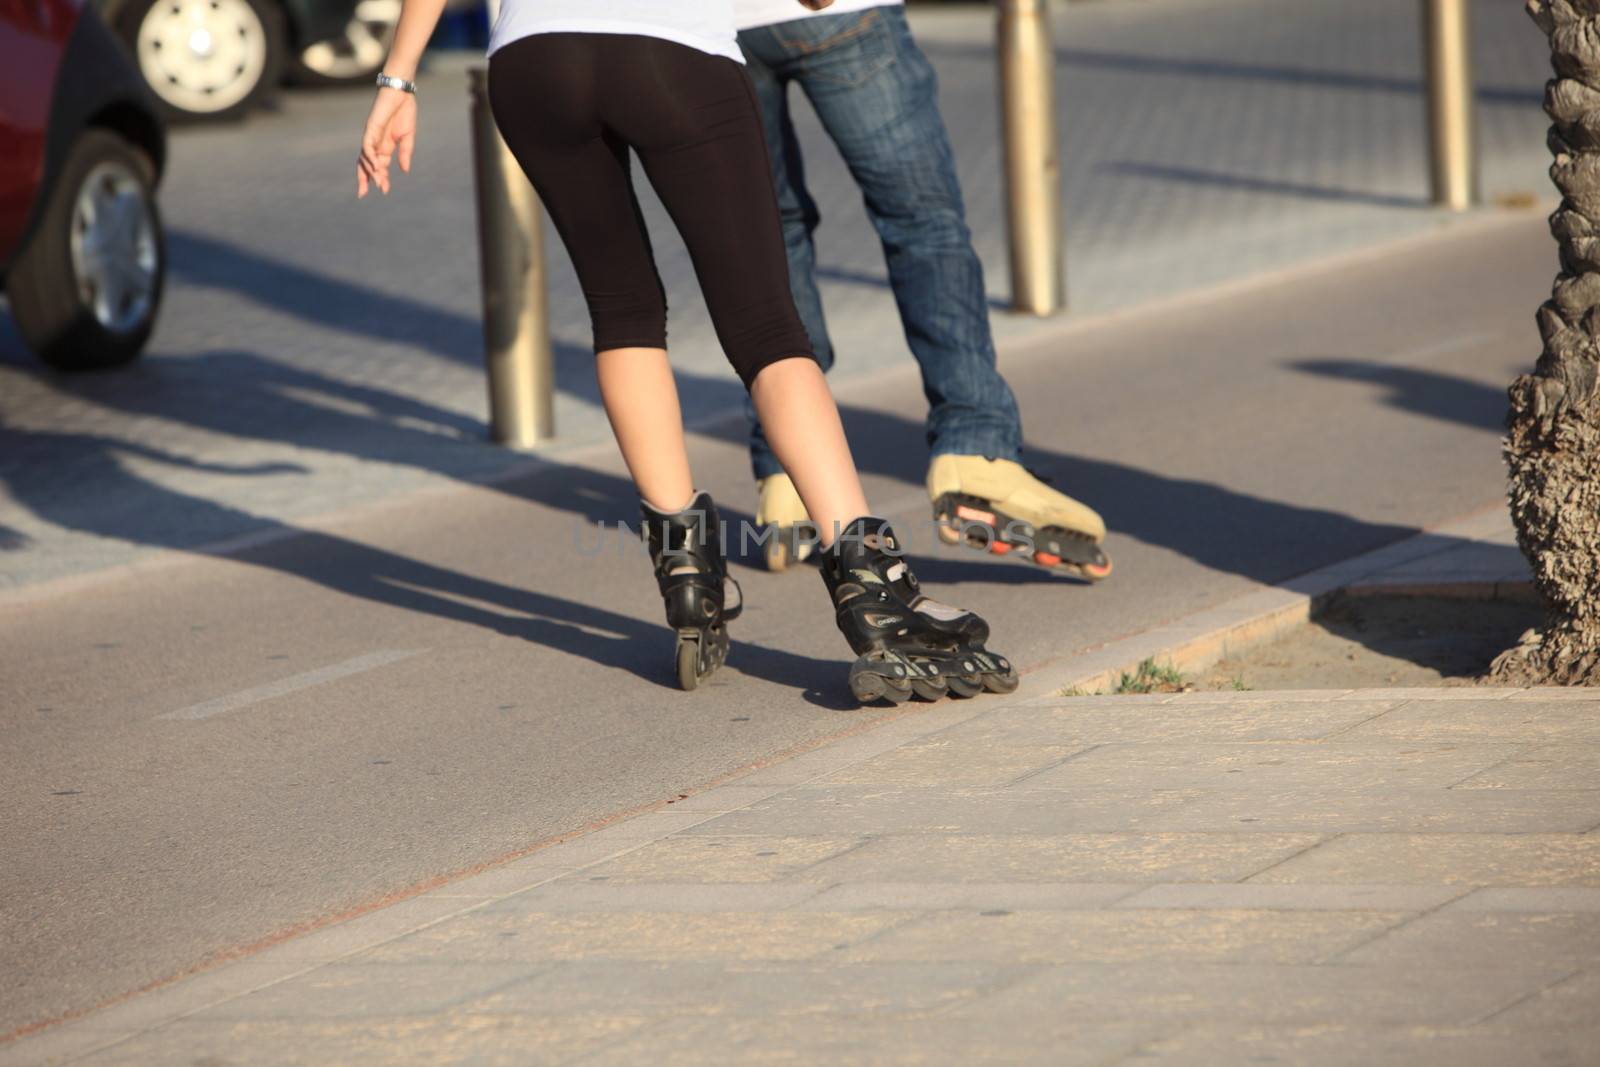 Cropped view of the legs of people rollerblading down an urban sidewalk going away from the camera